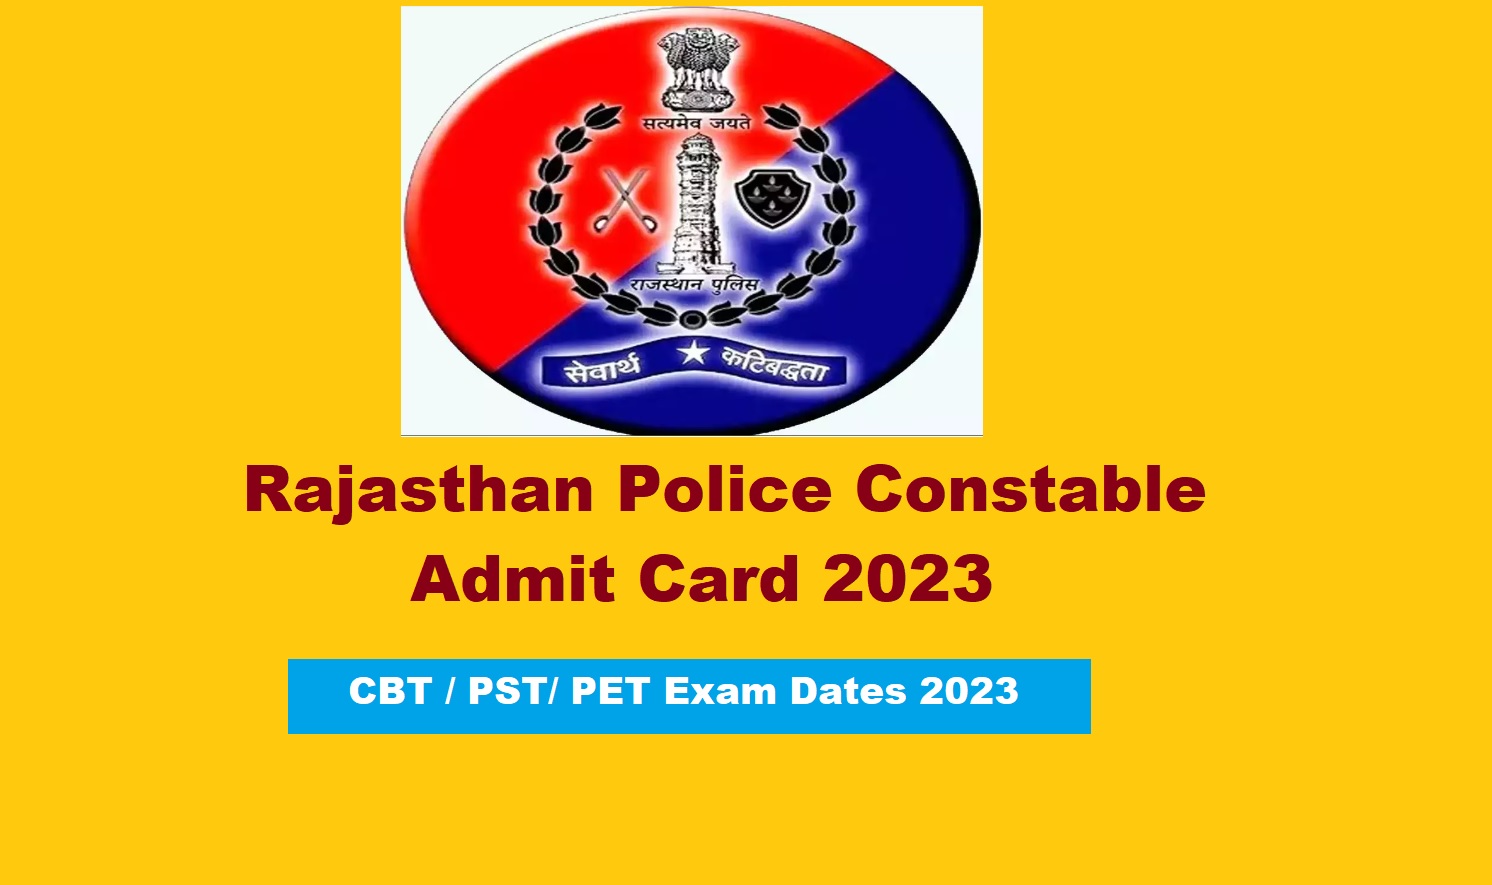 Rajasthan Police Constable Admit card 2023